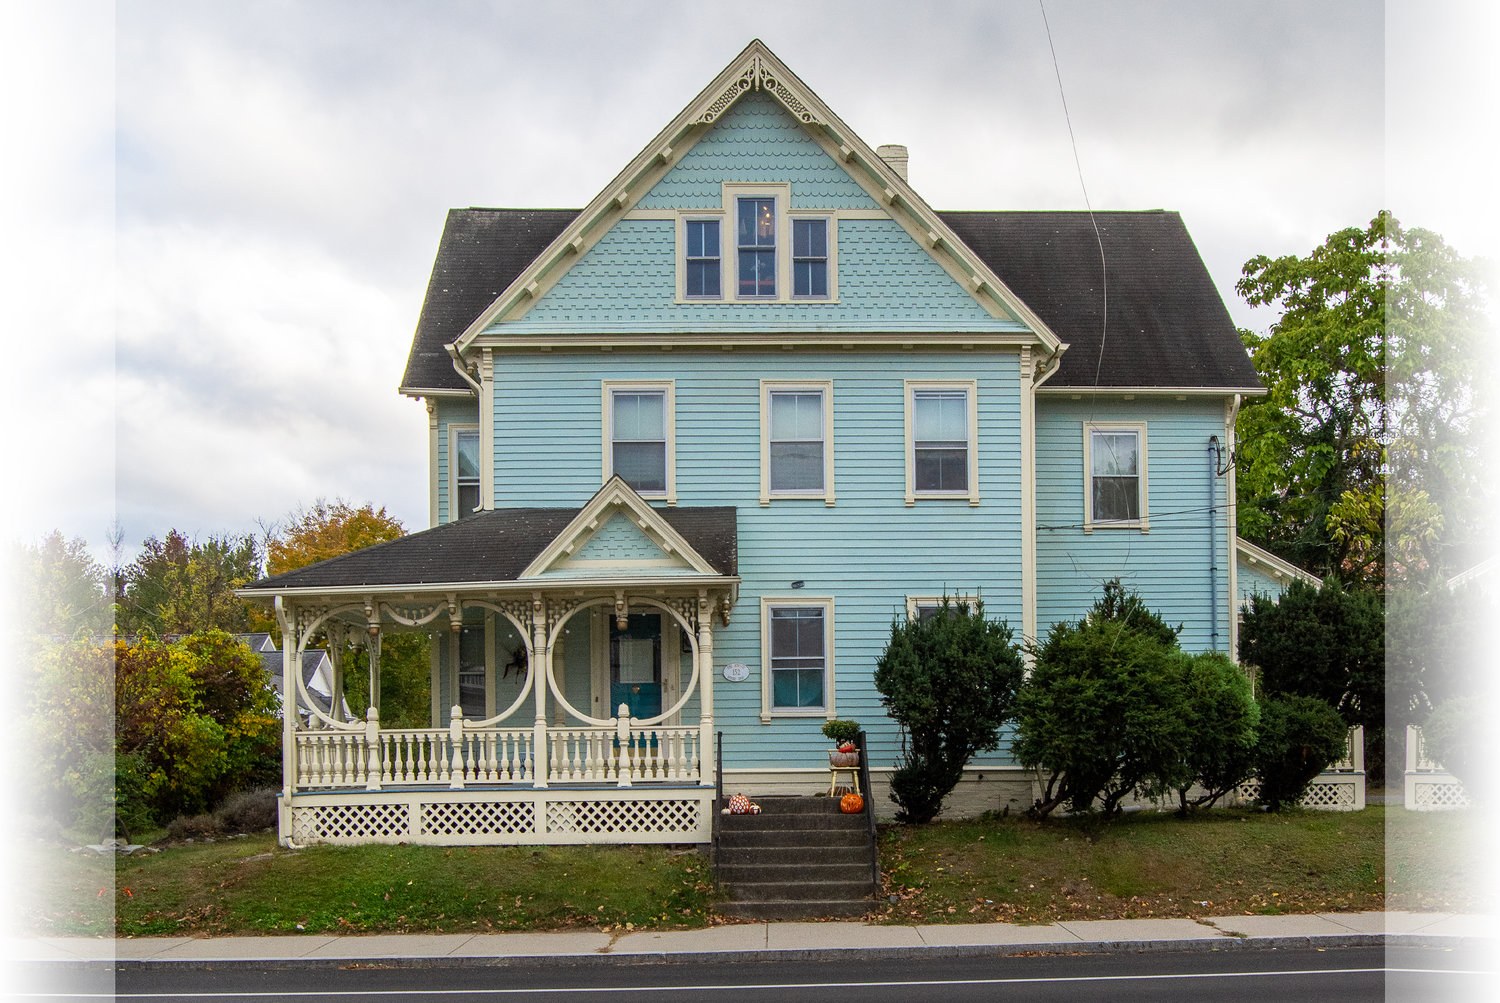 Folk Victorian, Scituate: This is another house I’ve been in love with for years! Look at that ridiculous porch woodwork. There is absolutely no reason for it to be there except for a little extra beauty – and what a wonderful reason to put it there!